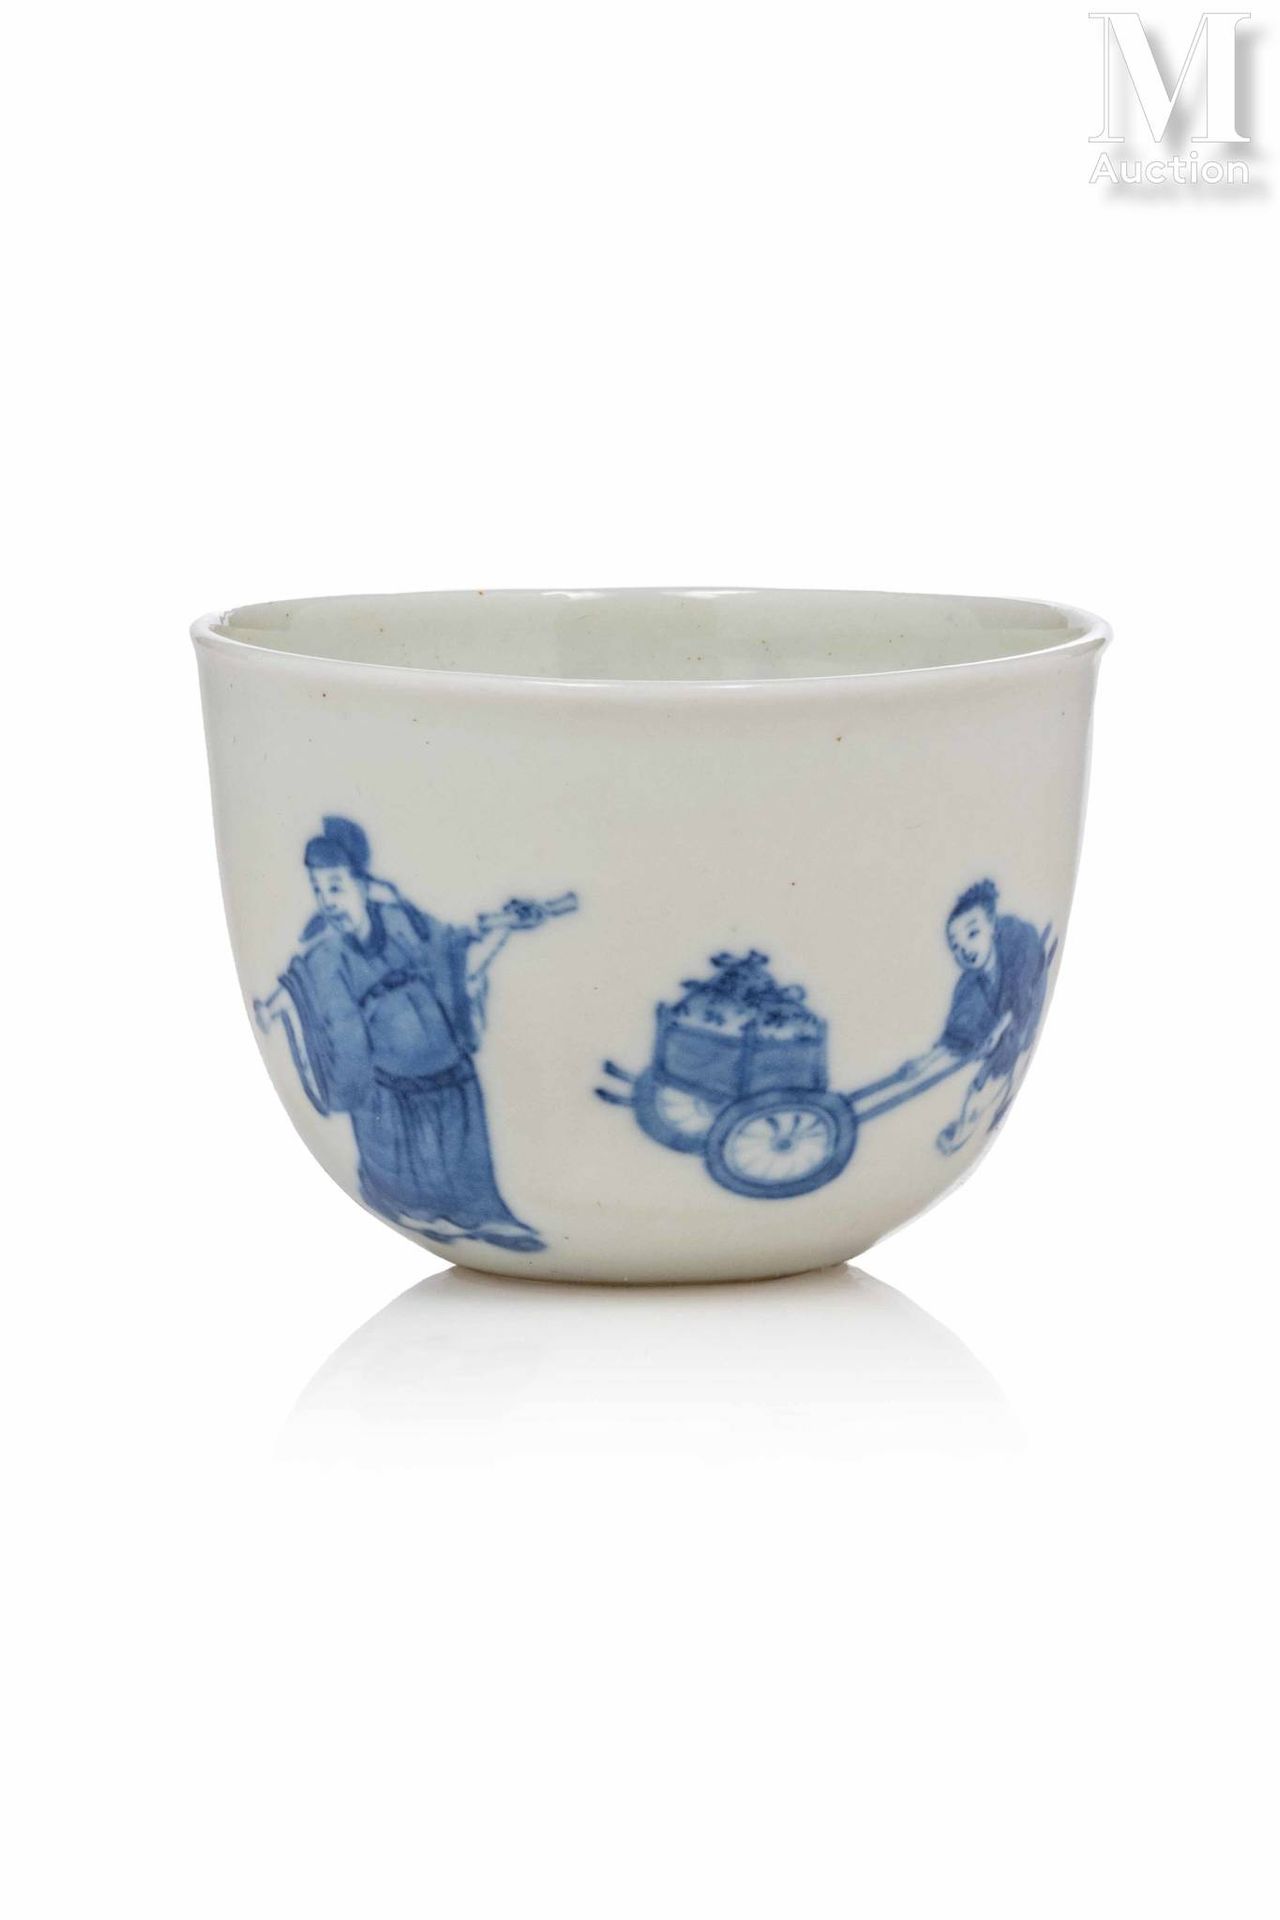 *CHINE, Epoque Kangxi, XVIIIe siècle Small blue and white porcelain bowl

with r&hellip;